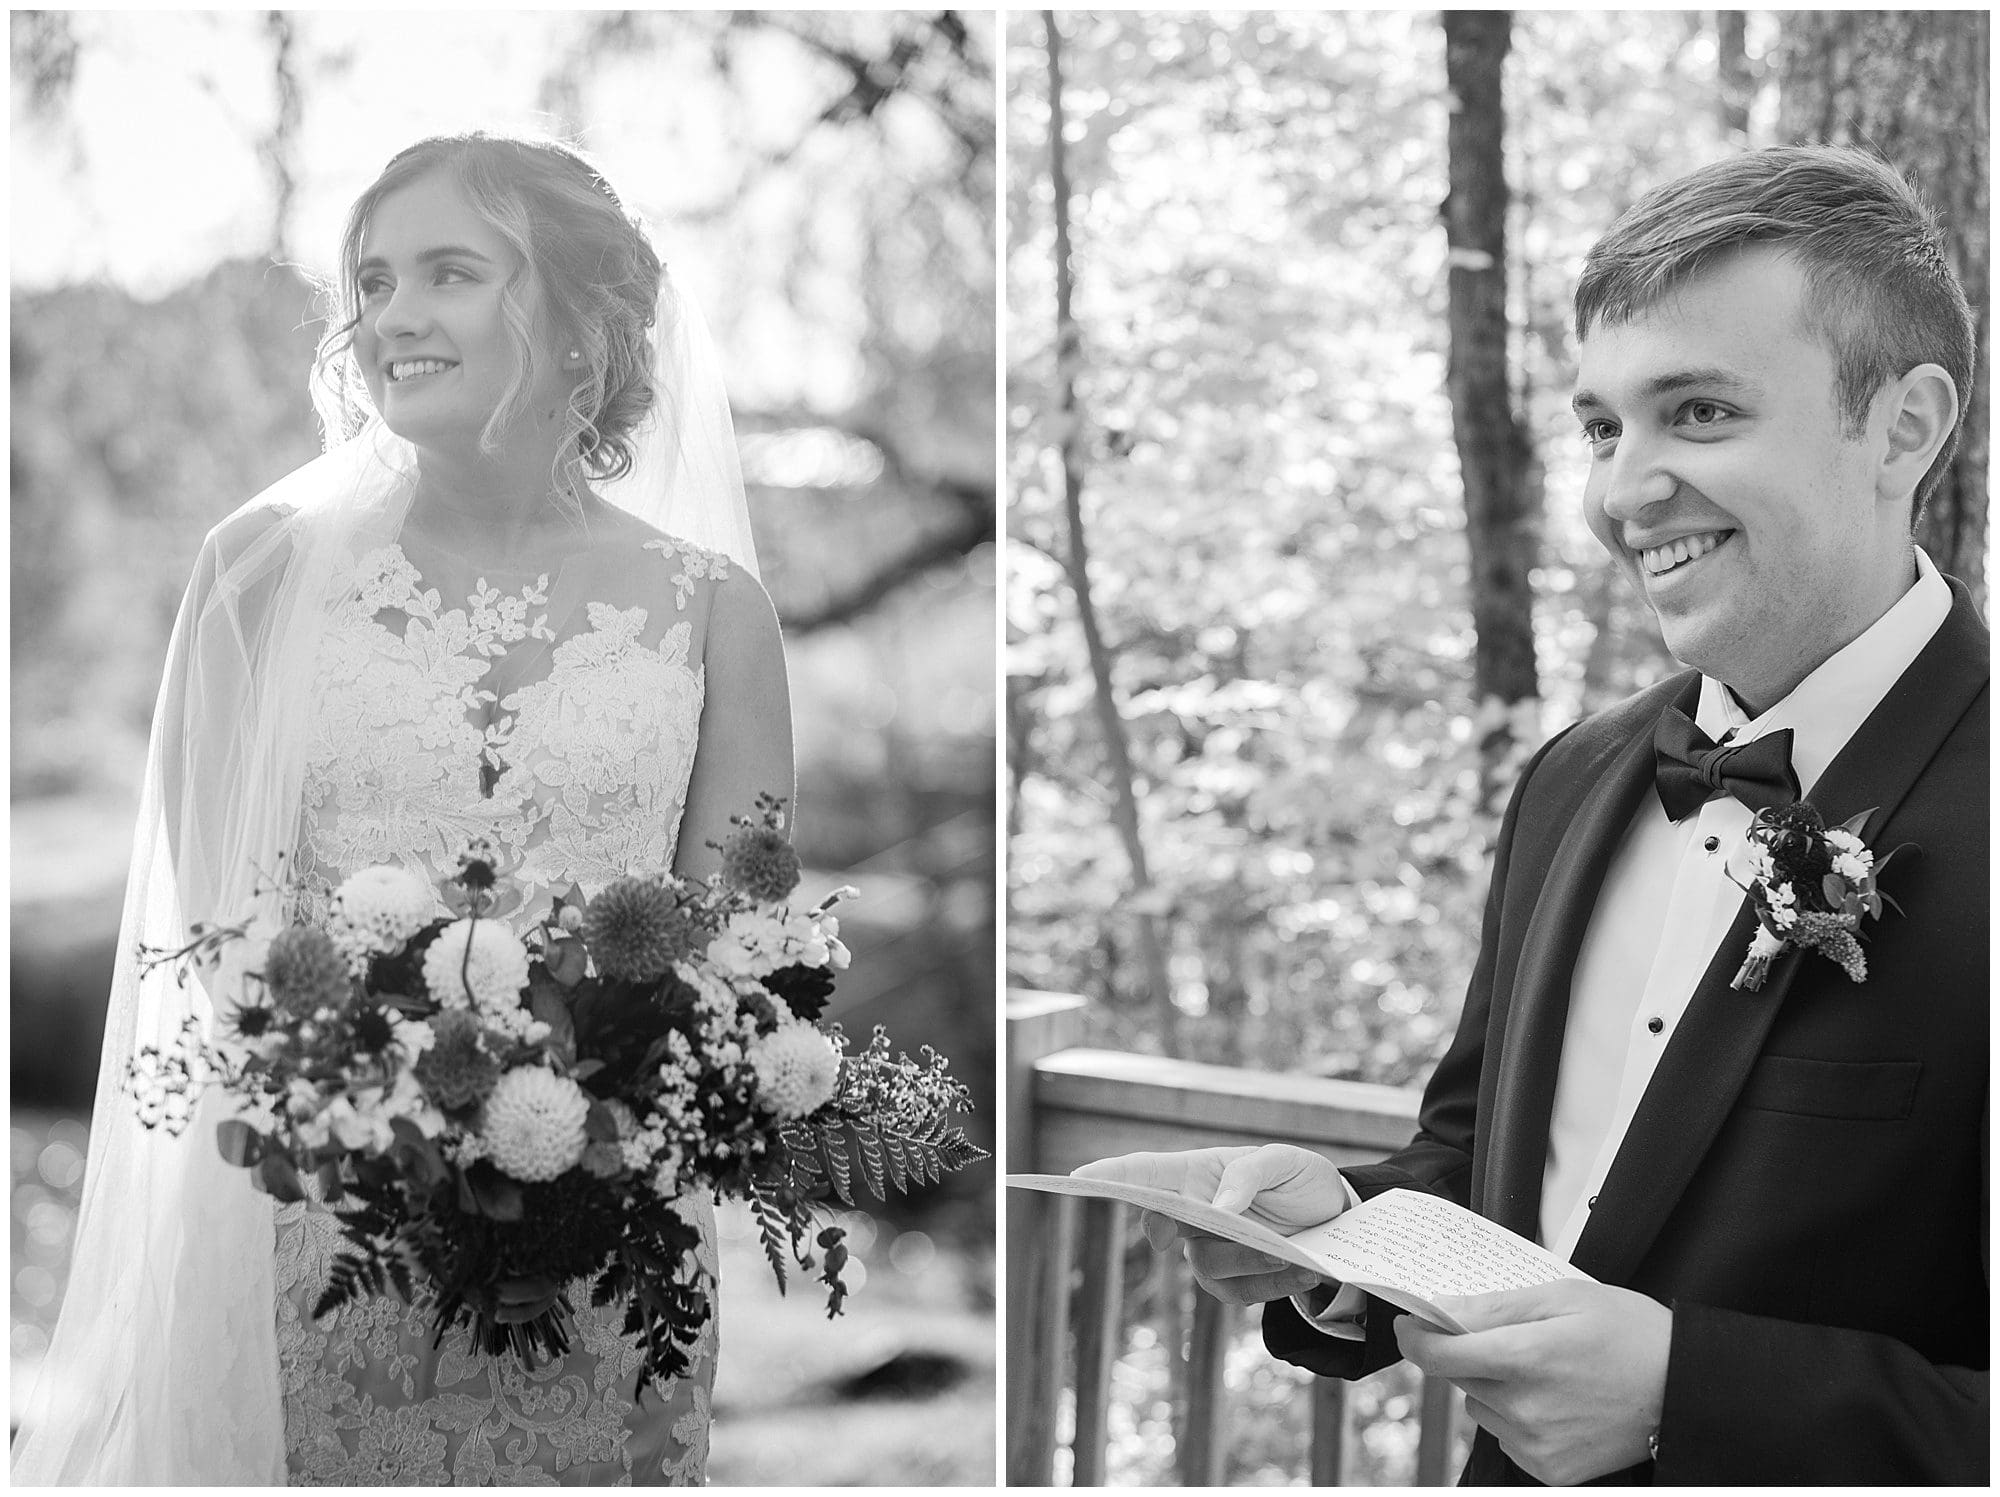 Split image of a bride holding a bouquet with a joyful expression and a groom reading from a card, both in formal wedding attire.